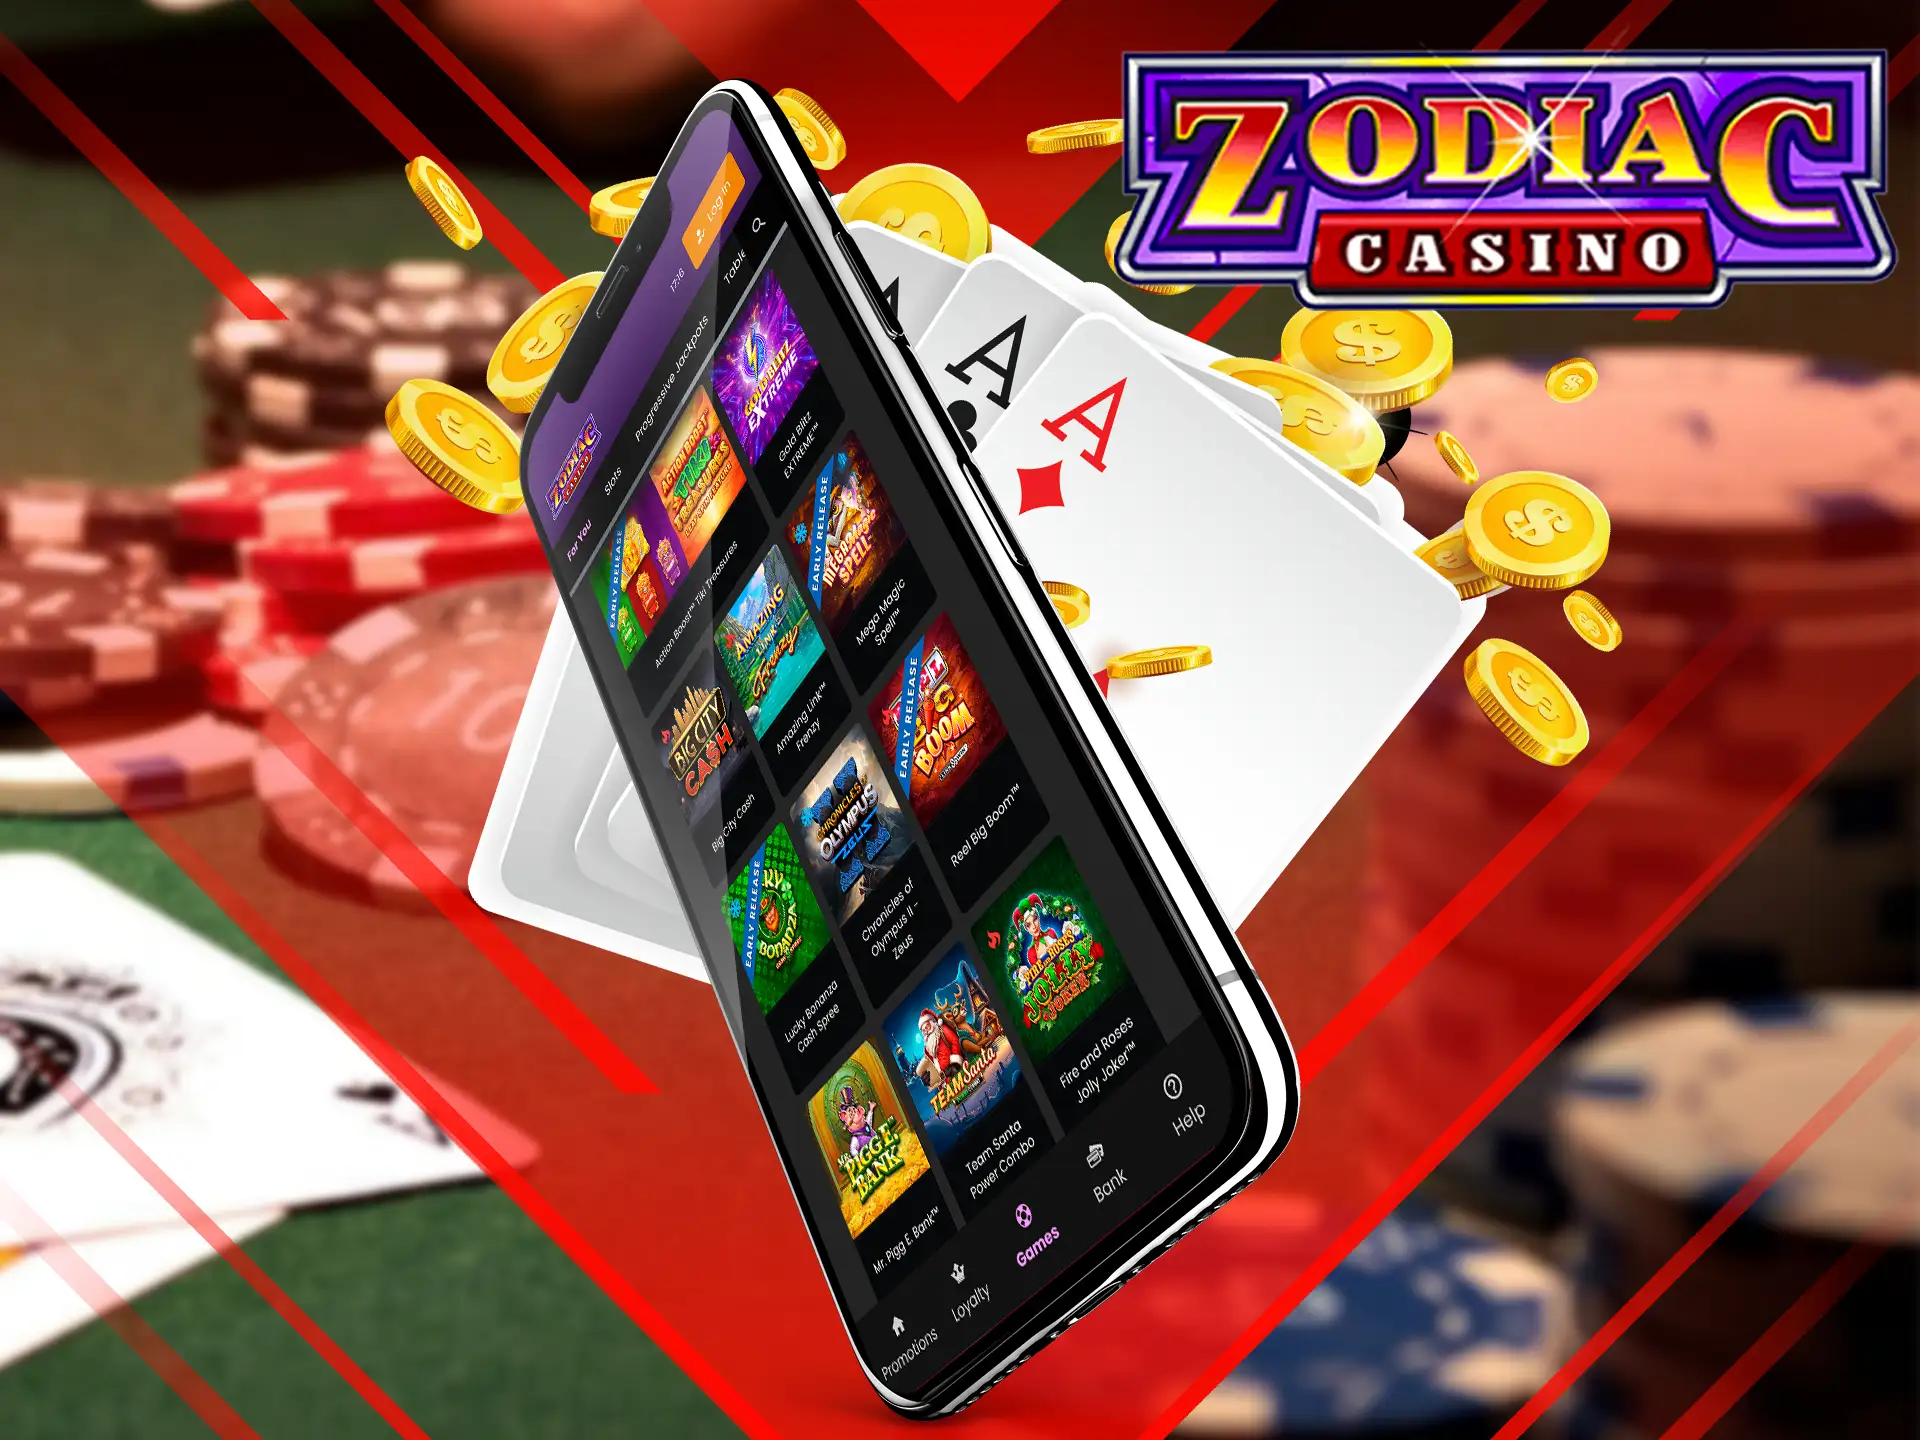 Play a pretty quick category of board games in the app or on the Zodiac Casino website.